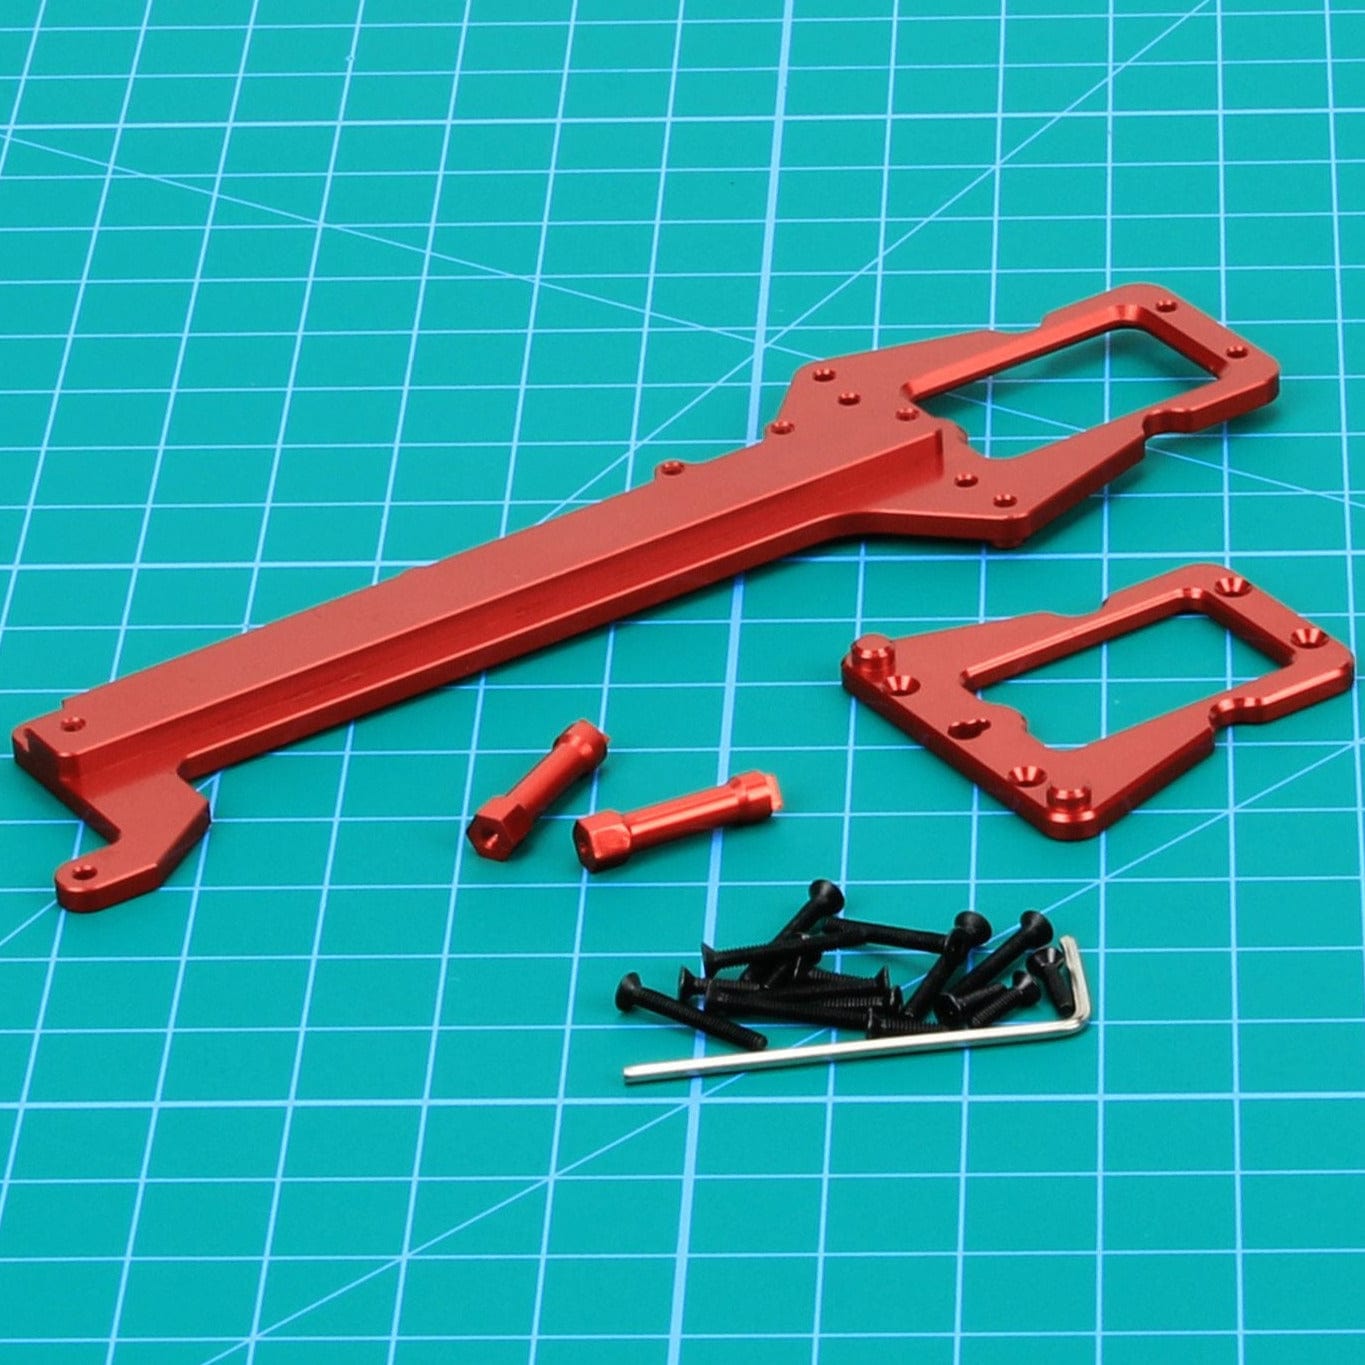 RCAWD Traxxas Latrax Red RCAWD Aluminum Upper Chassis for 1/18 Traxxas Latrax Upgrades